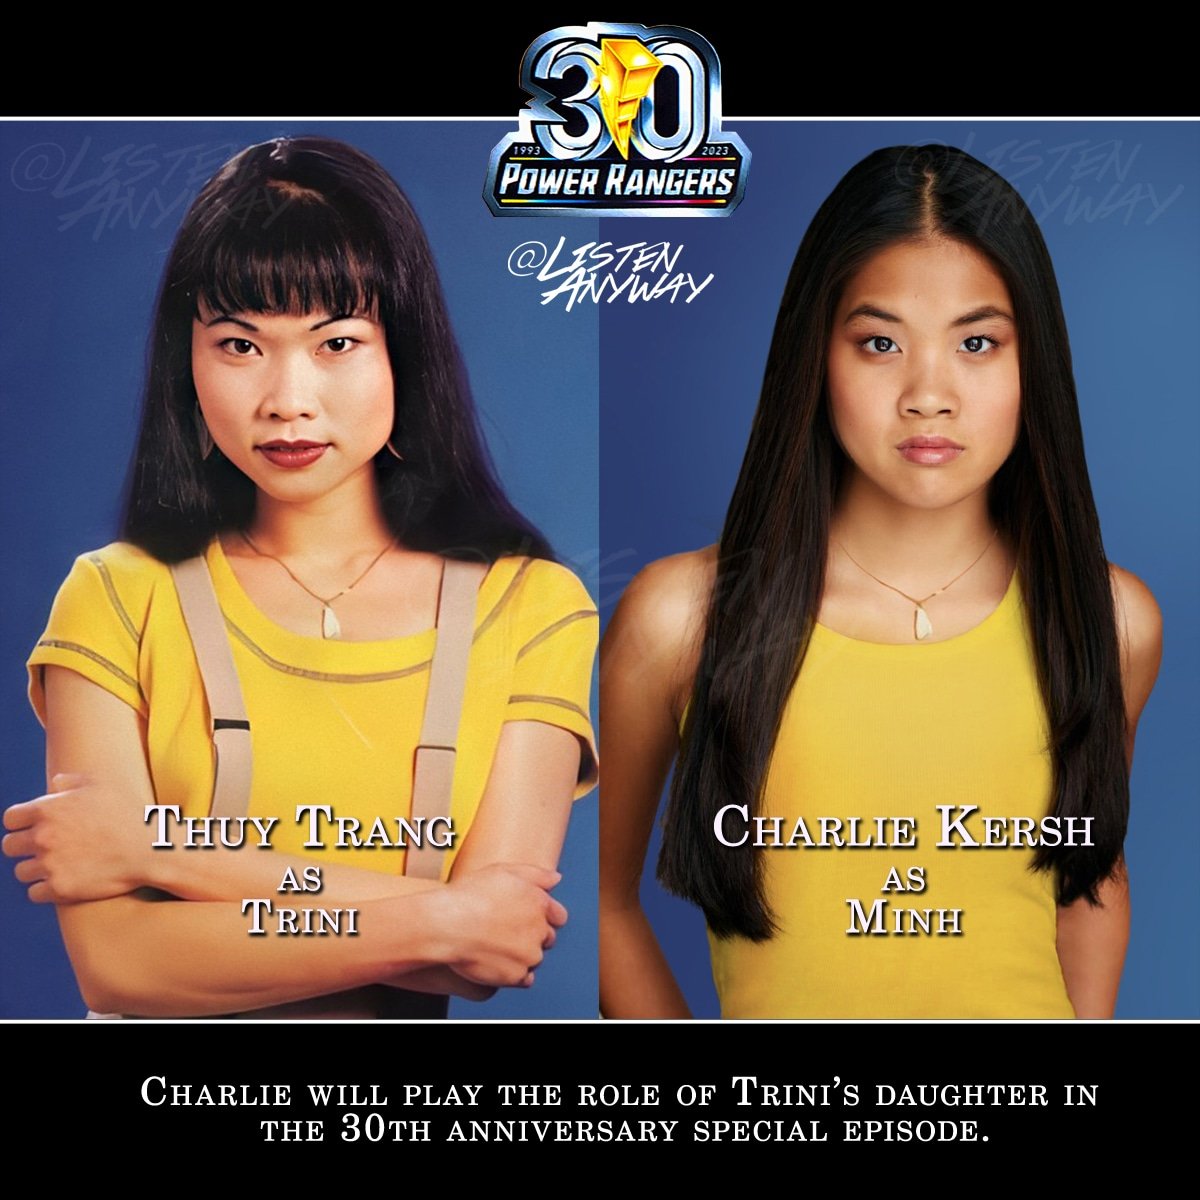 Thuy Trang was born in Saigon, South Vietnam, now Ho Chi Minh City, Vietnam.

Is that why Trini's daughter name is Minh, as a tribute where Thuy was born?

#MMPR #mightymorphin #powerrangers #mightymorphinpowerrangers #jasonleescott #zacktaylor #trinikwan  #minhkwan @thuytribute